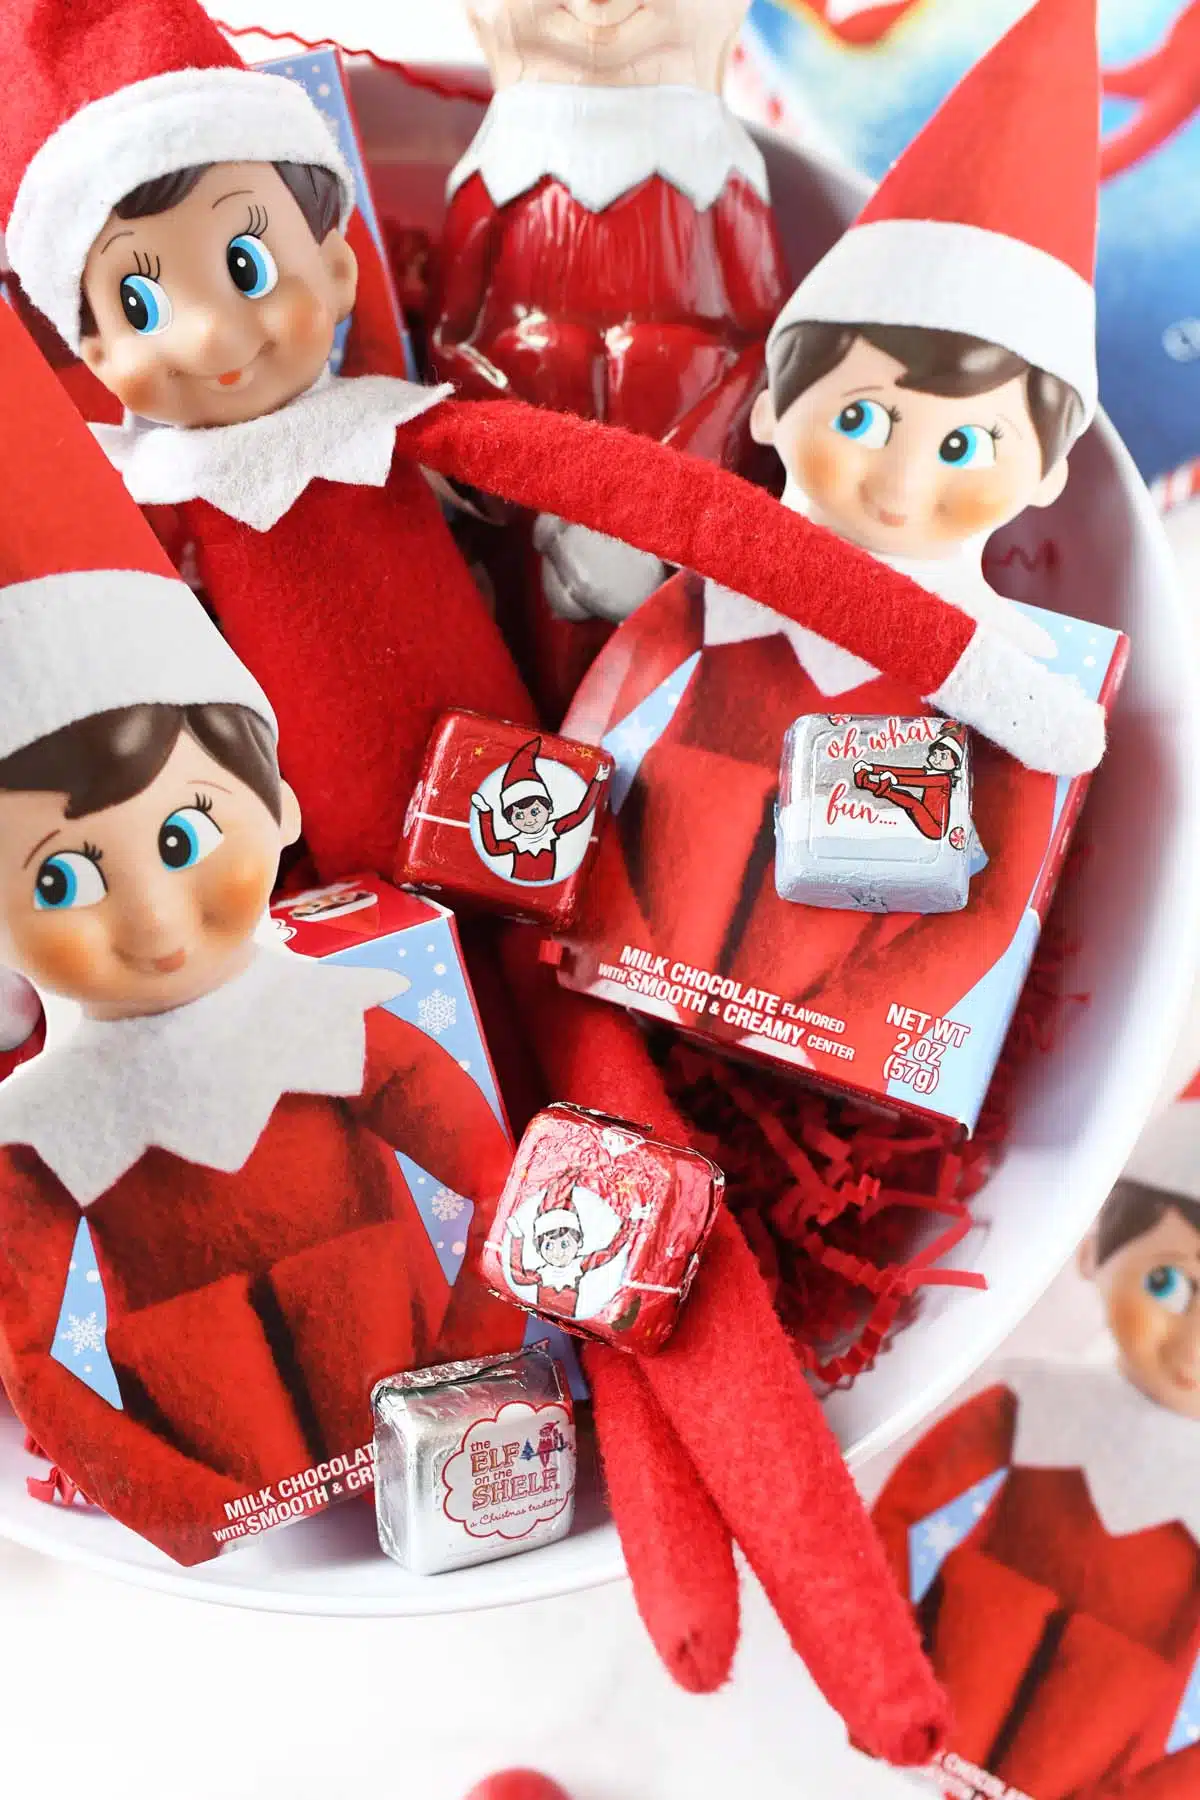 Elf on the shelf candy in a red bowl.